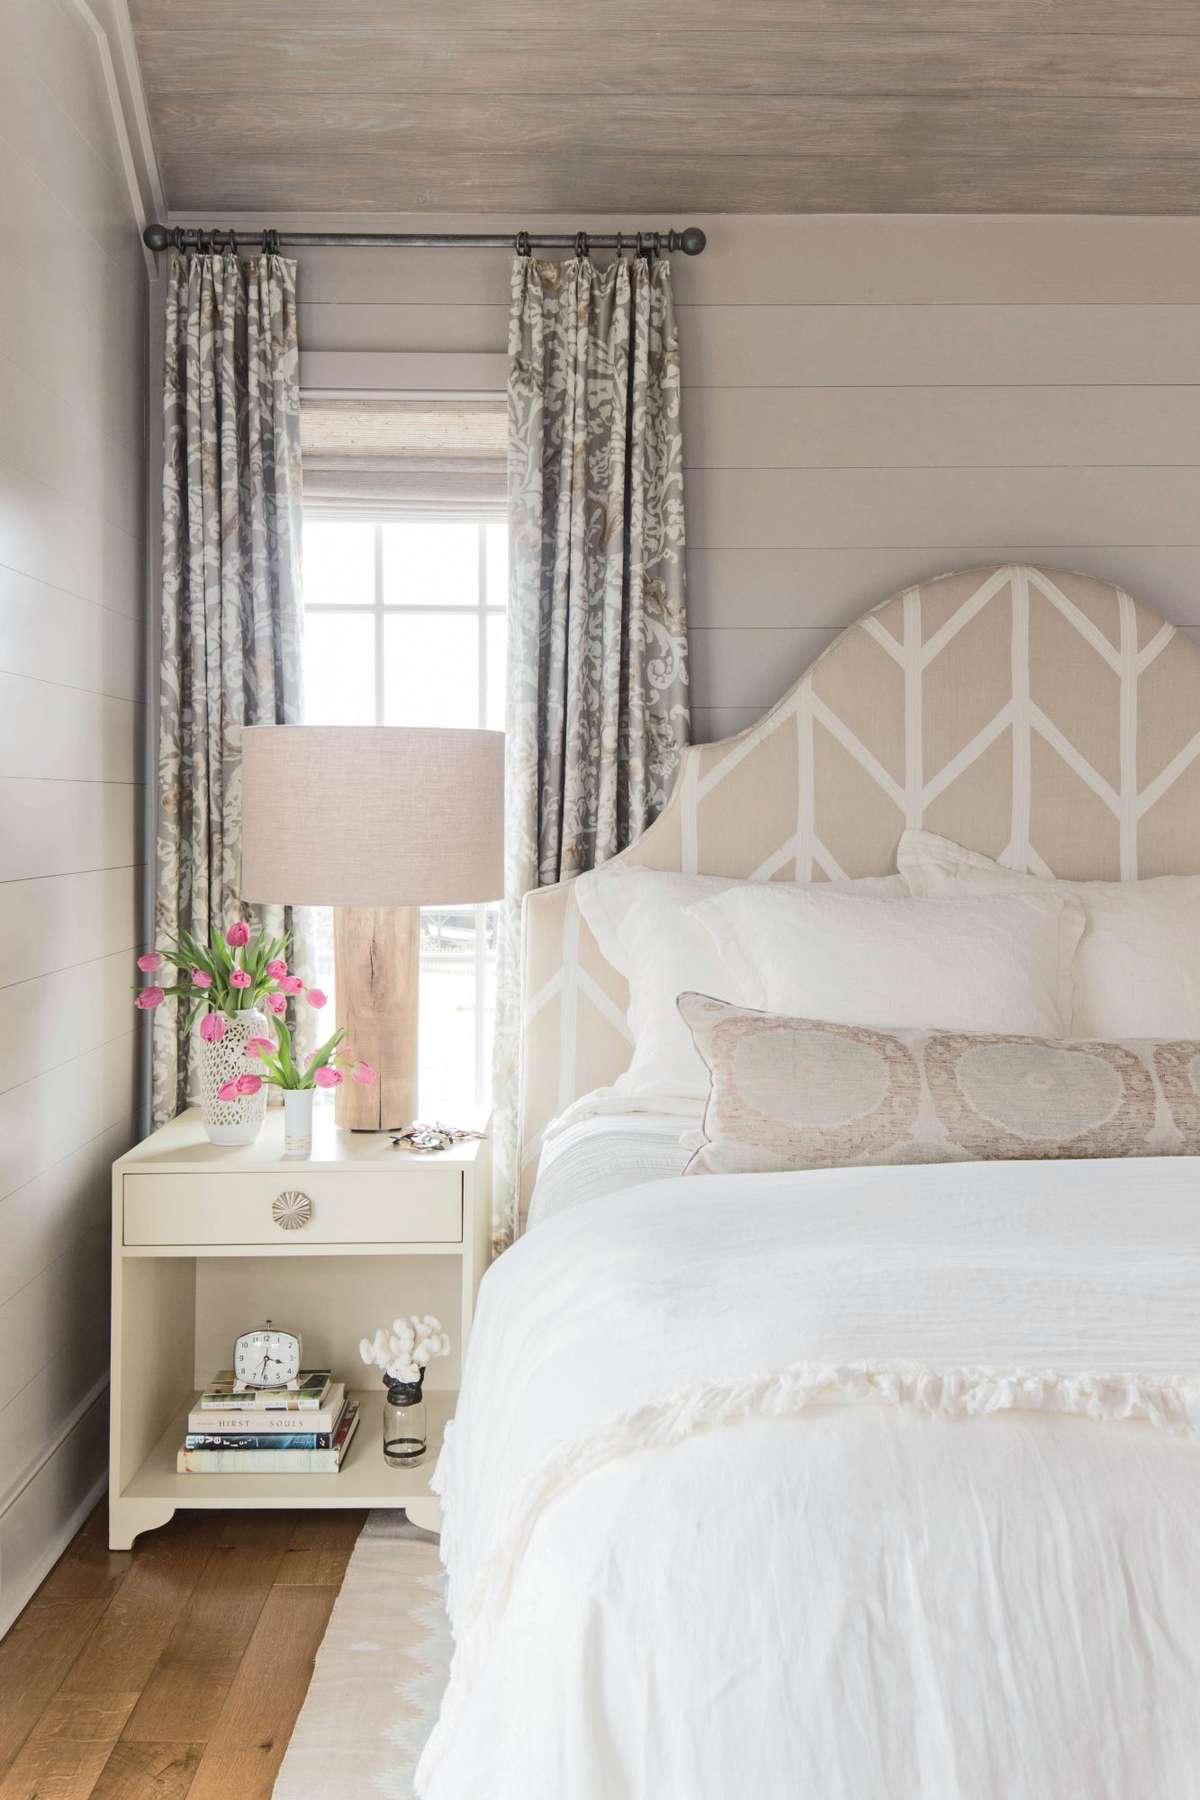 In this Sullivan’s Island, South Carolina, master bedroom, it’s all about a muted and romantic color palette.